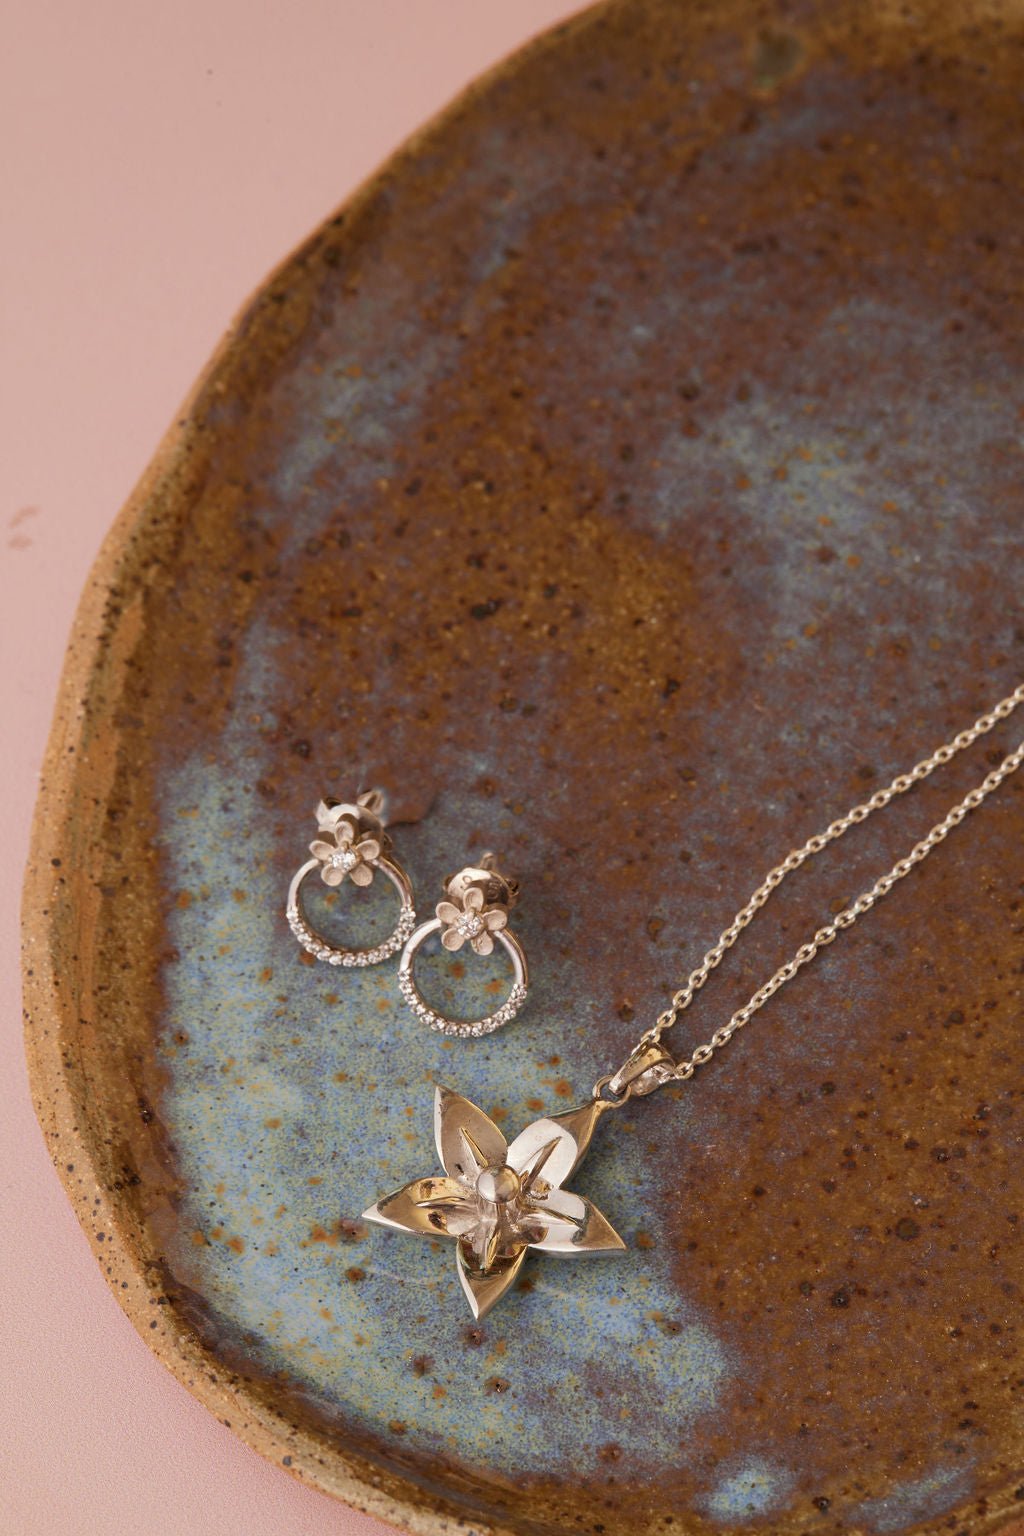 Lily Necklace and Polyhymnia Crystal Sterling Silver Earrings SET - Ema Jewels